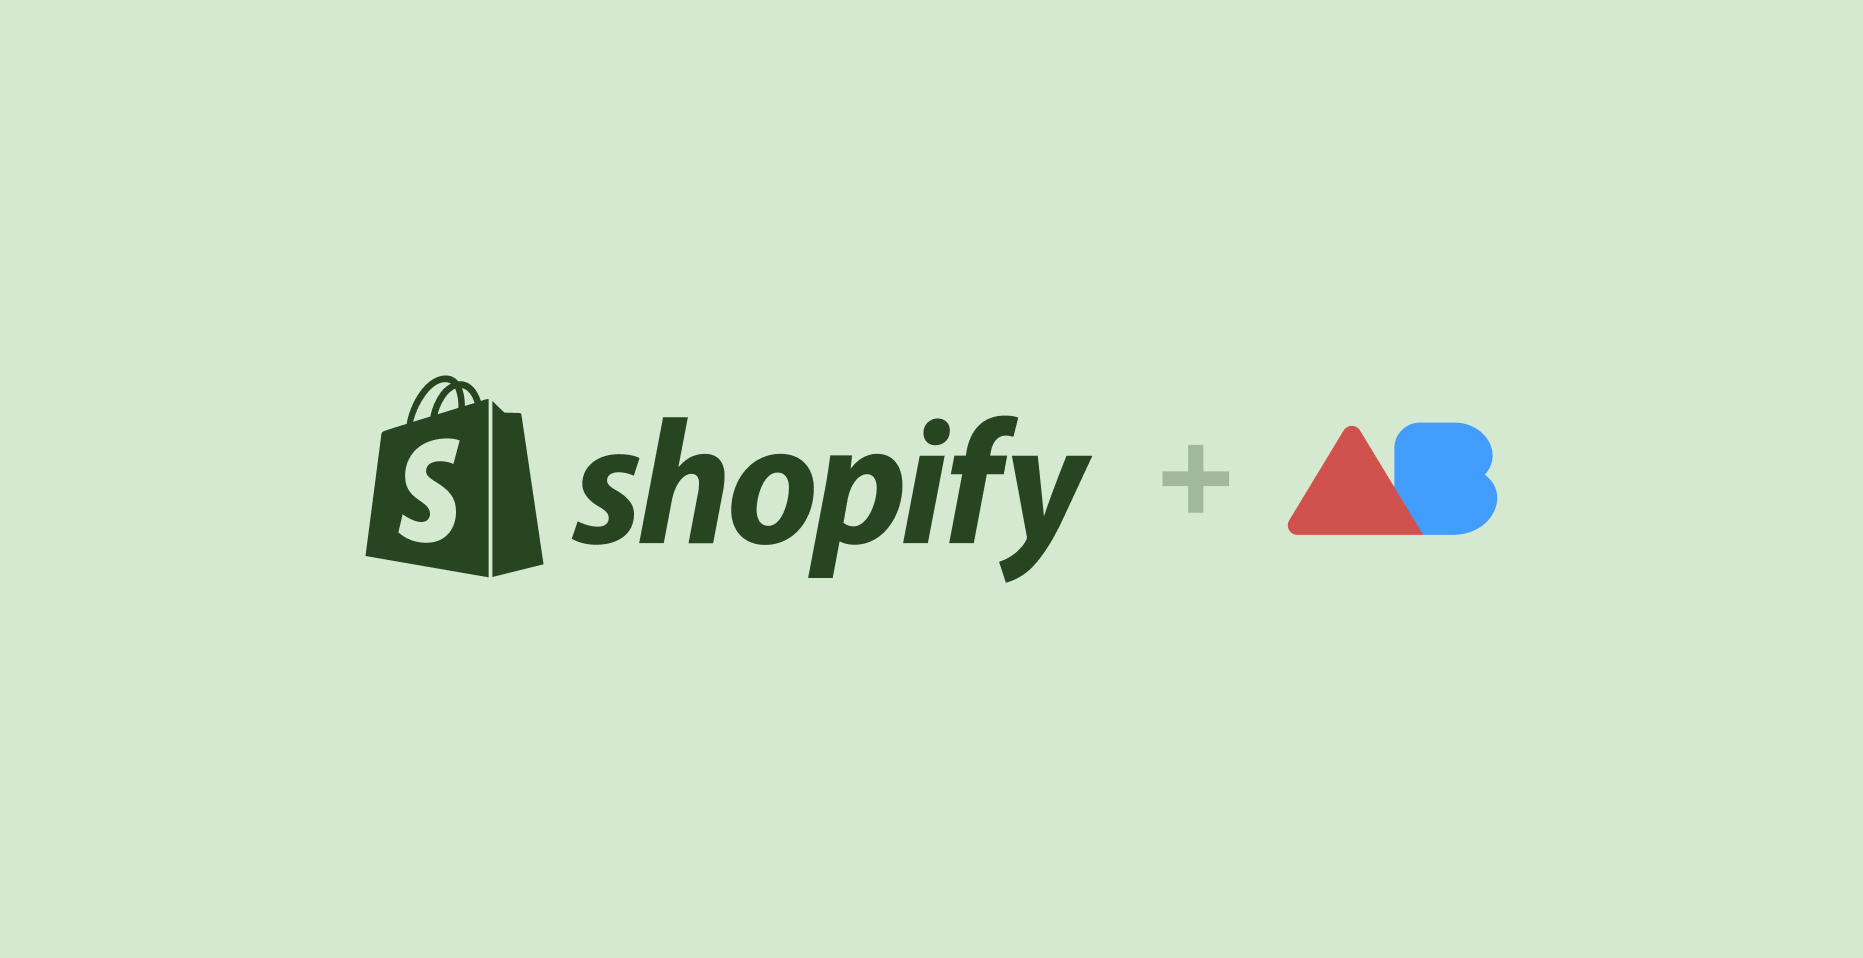 How to do A/B testing on Shopify